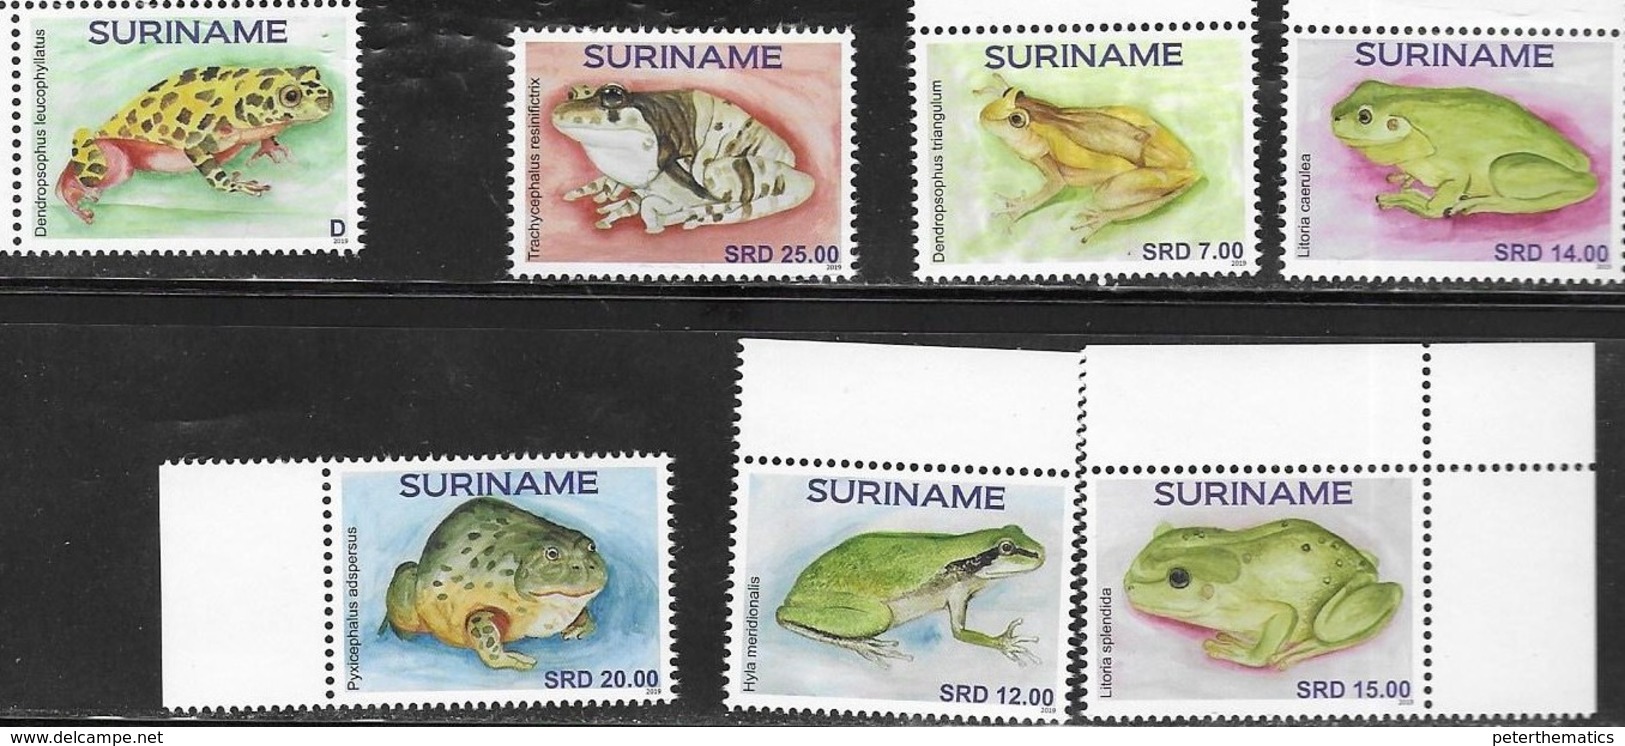 SURINAME, 2019, MNH, FROGS,7 Individual Stamps Cut From Sheetlet - Frogs